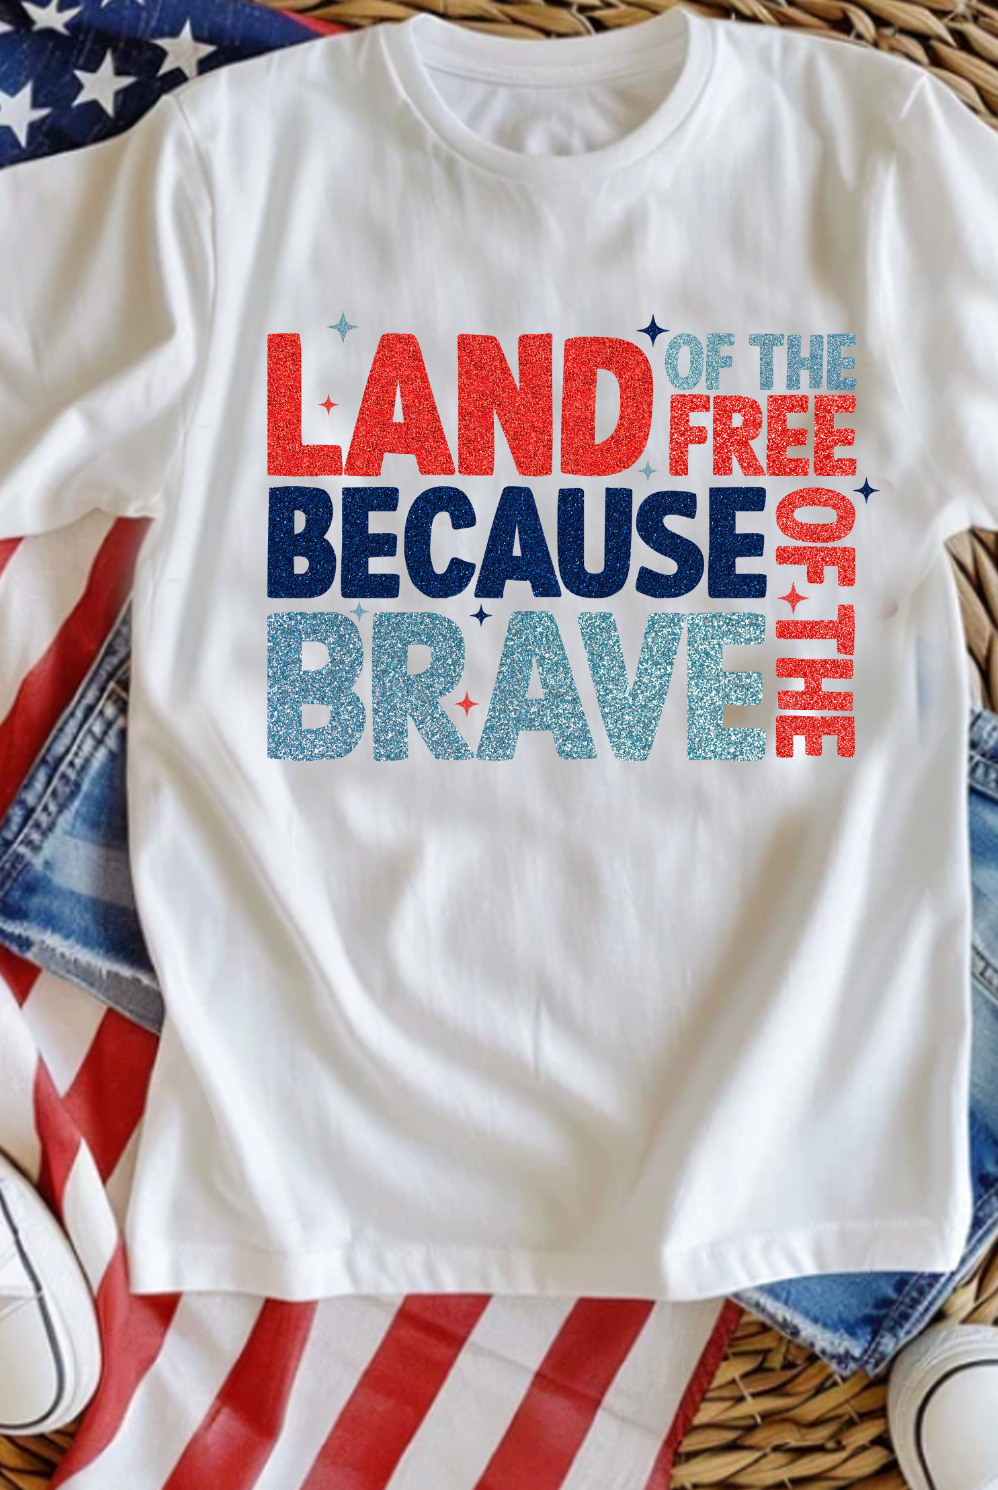 Land of the Free Because of the Brave American Americana Tshirt. Bella and Canvas, made in the USA. Shirt is White.